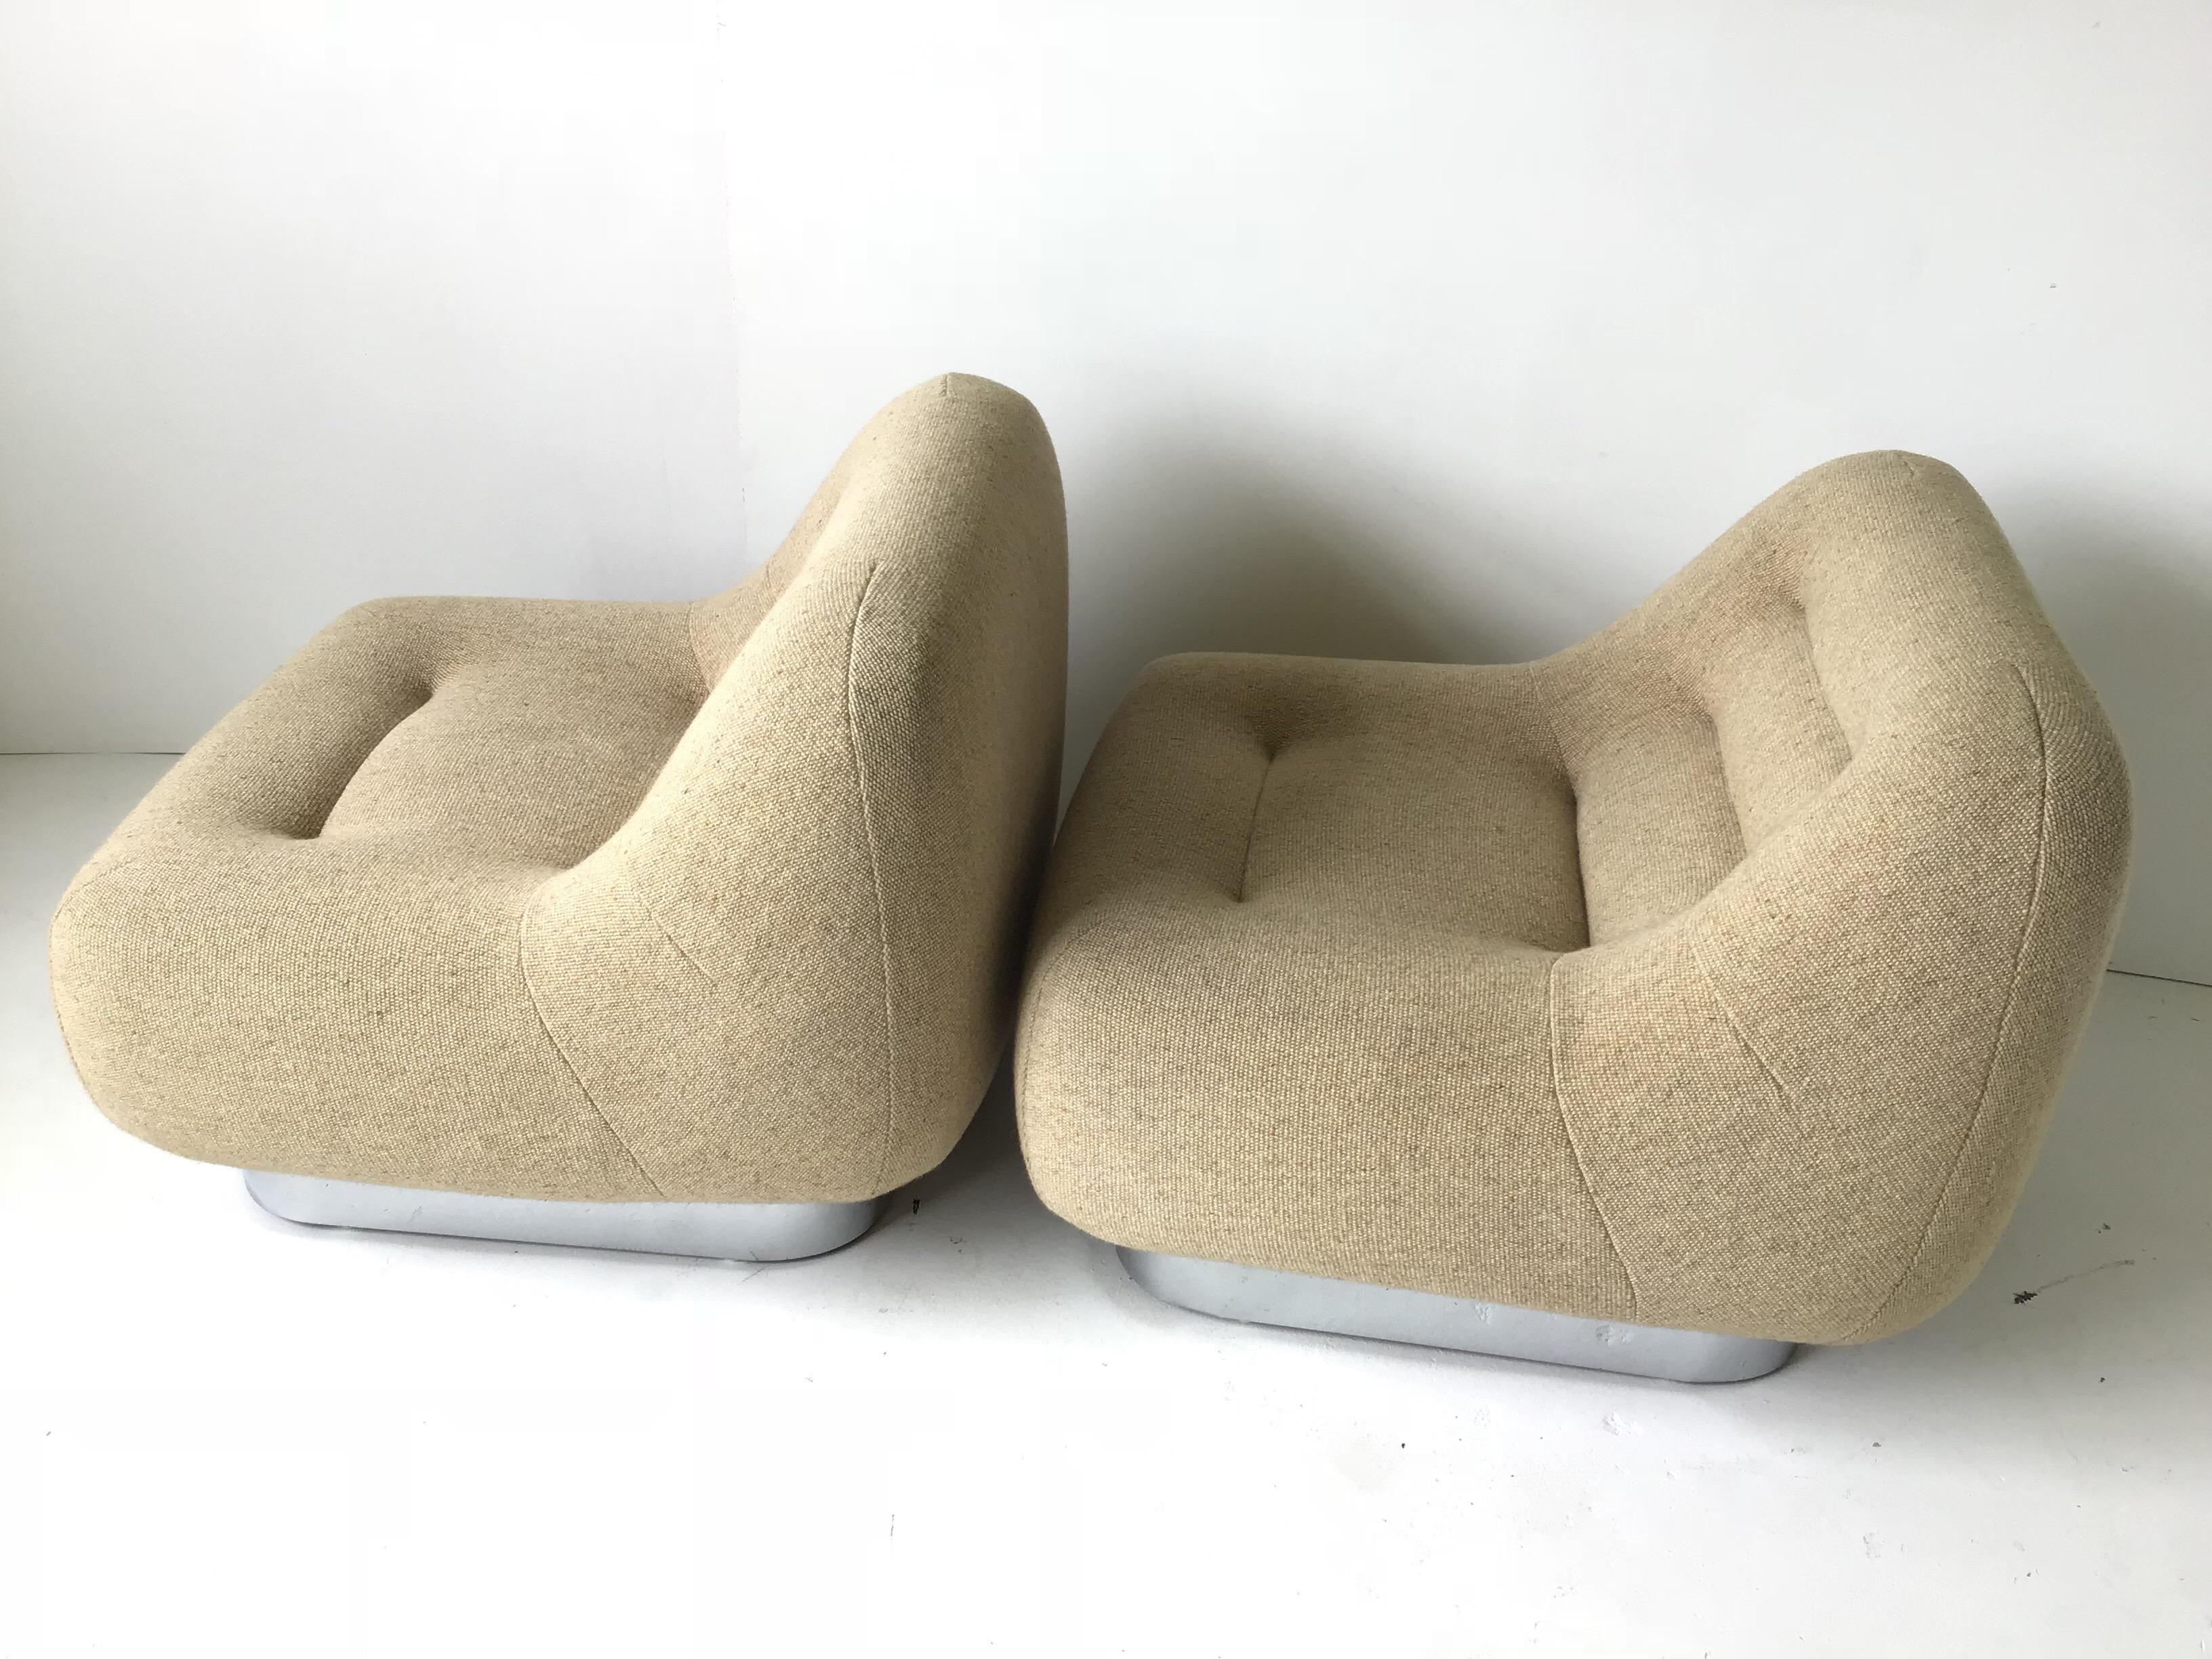 Late 20th Century Pair of M.F. Harty Tomorrow Lounge Chairs for Stow Davis For Sale